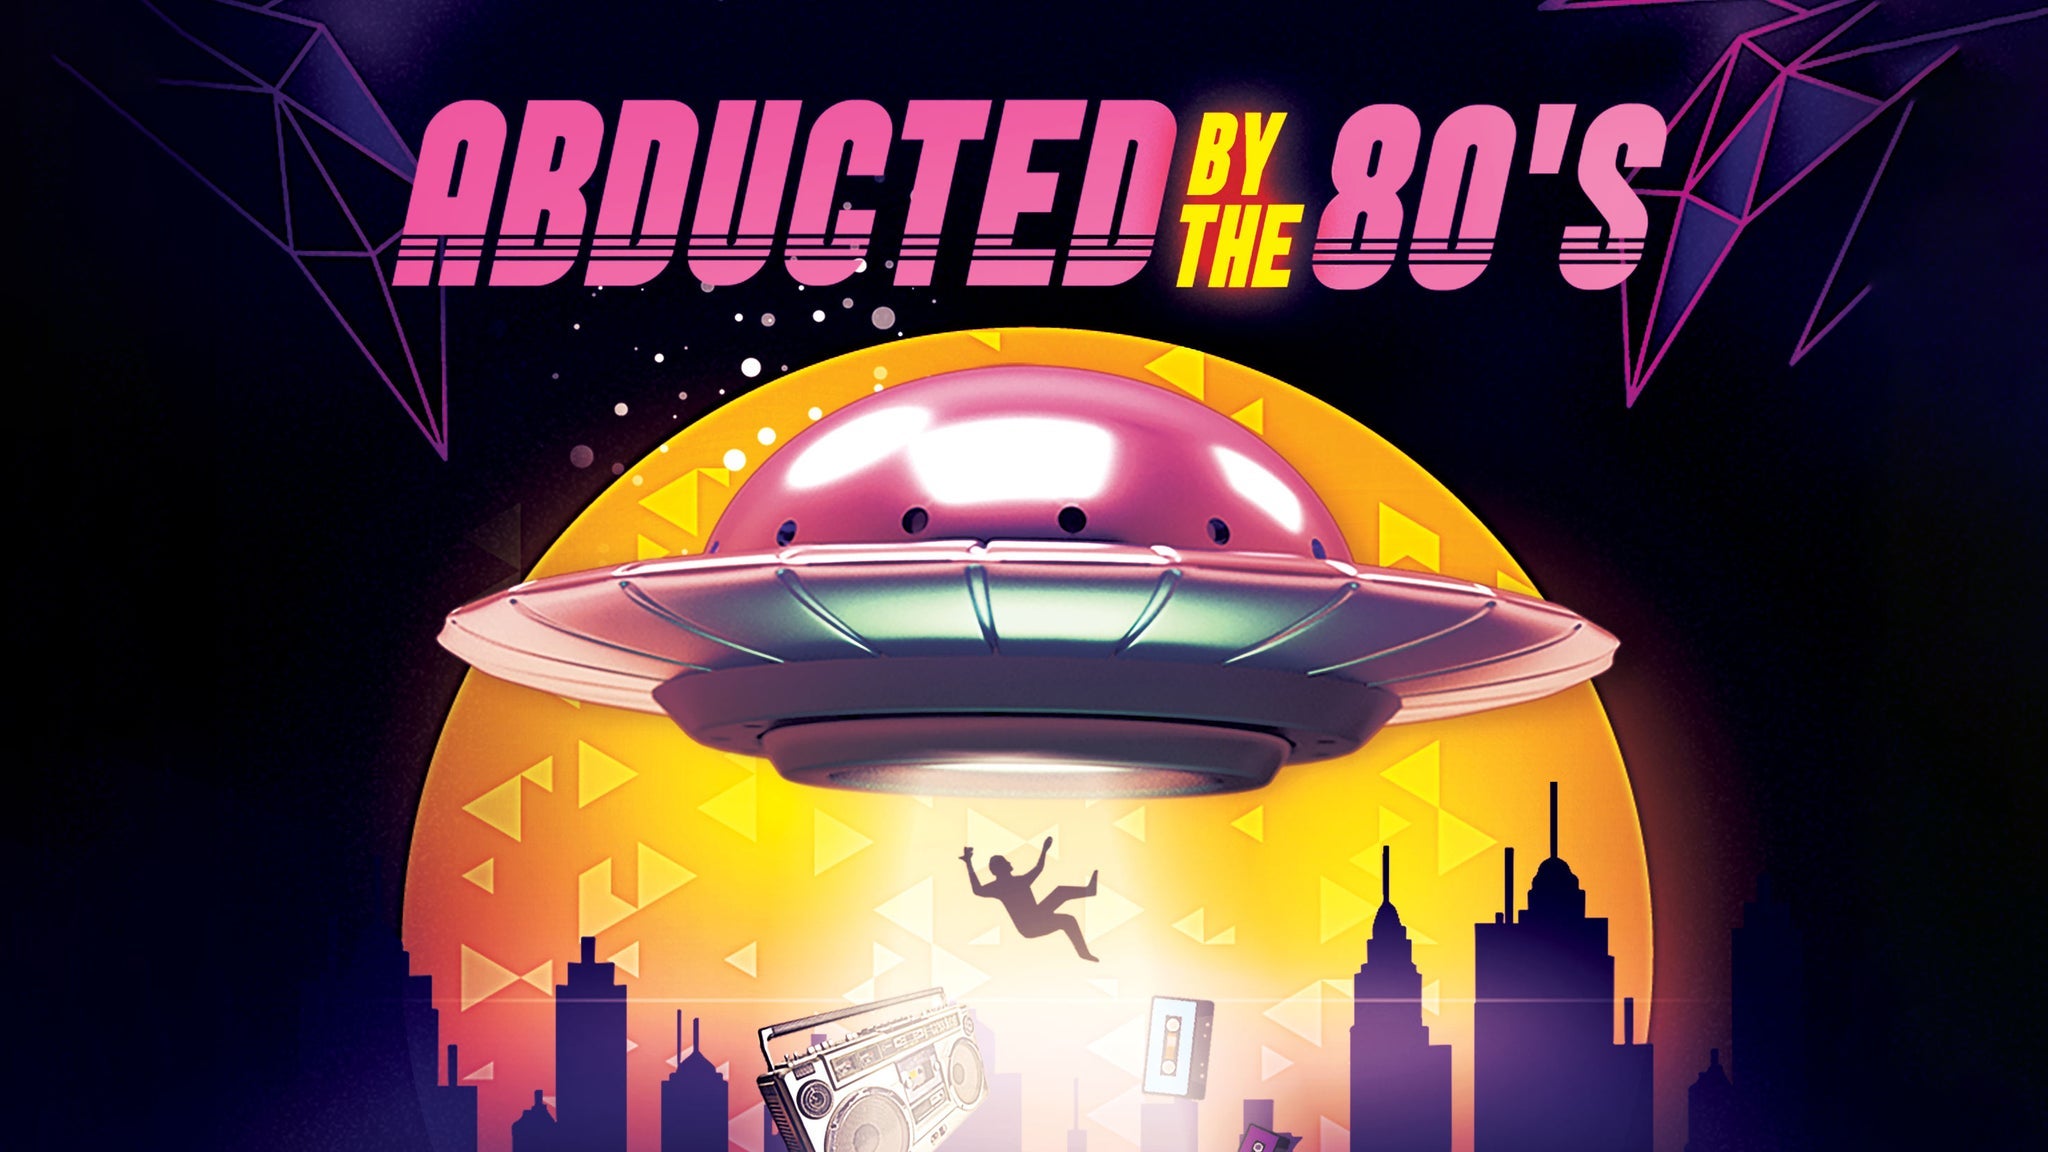 Abducted By The 80s